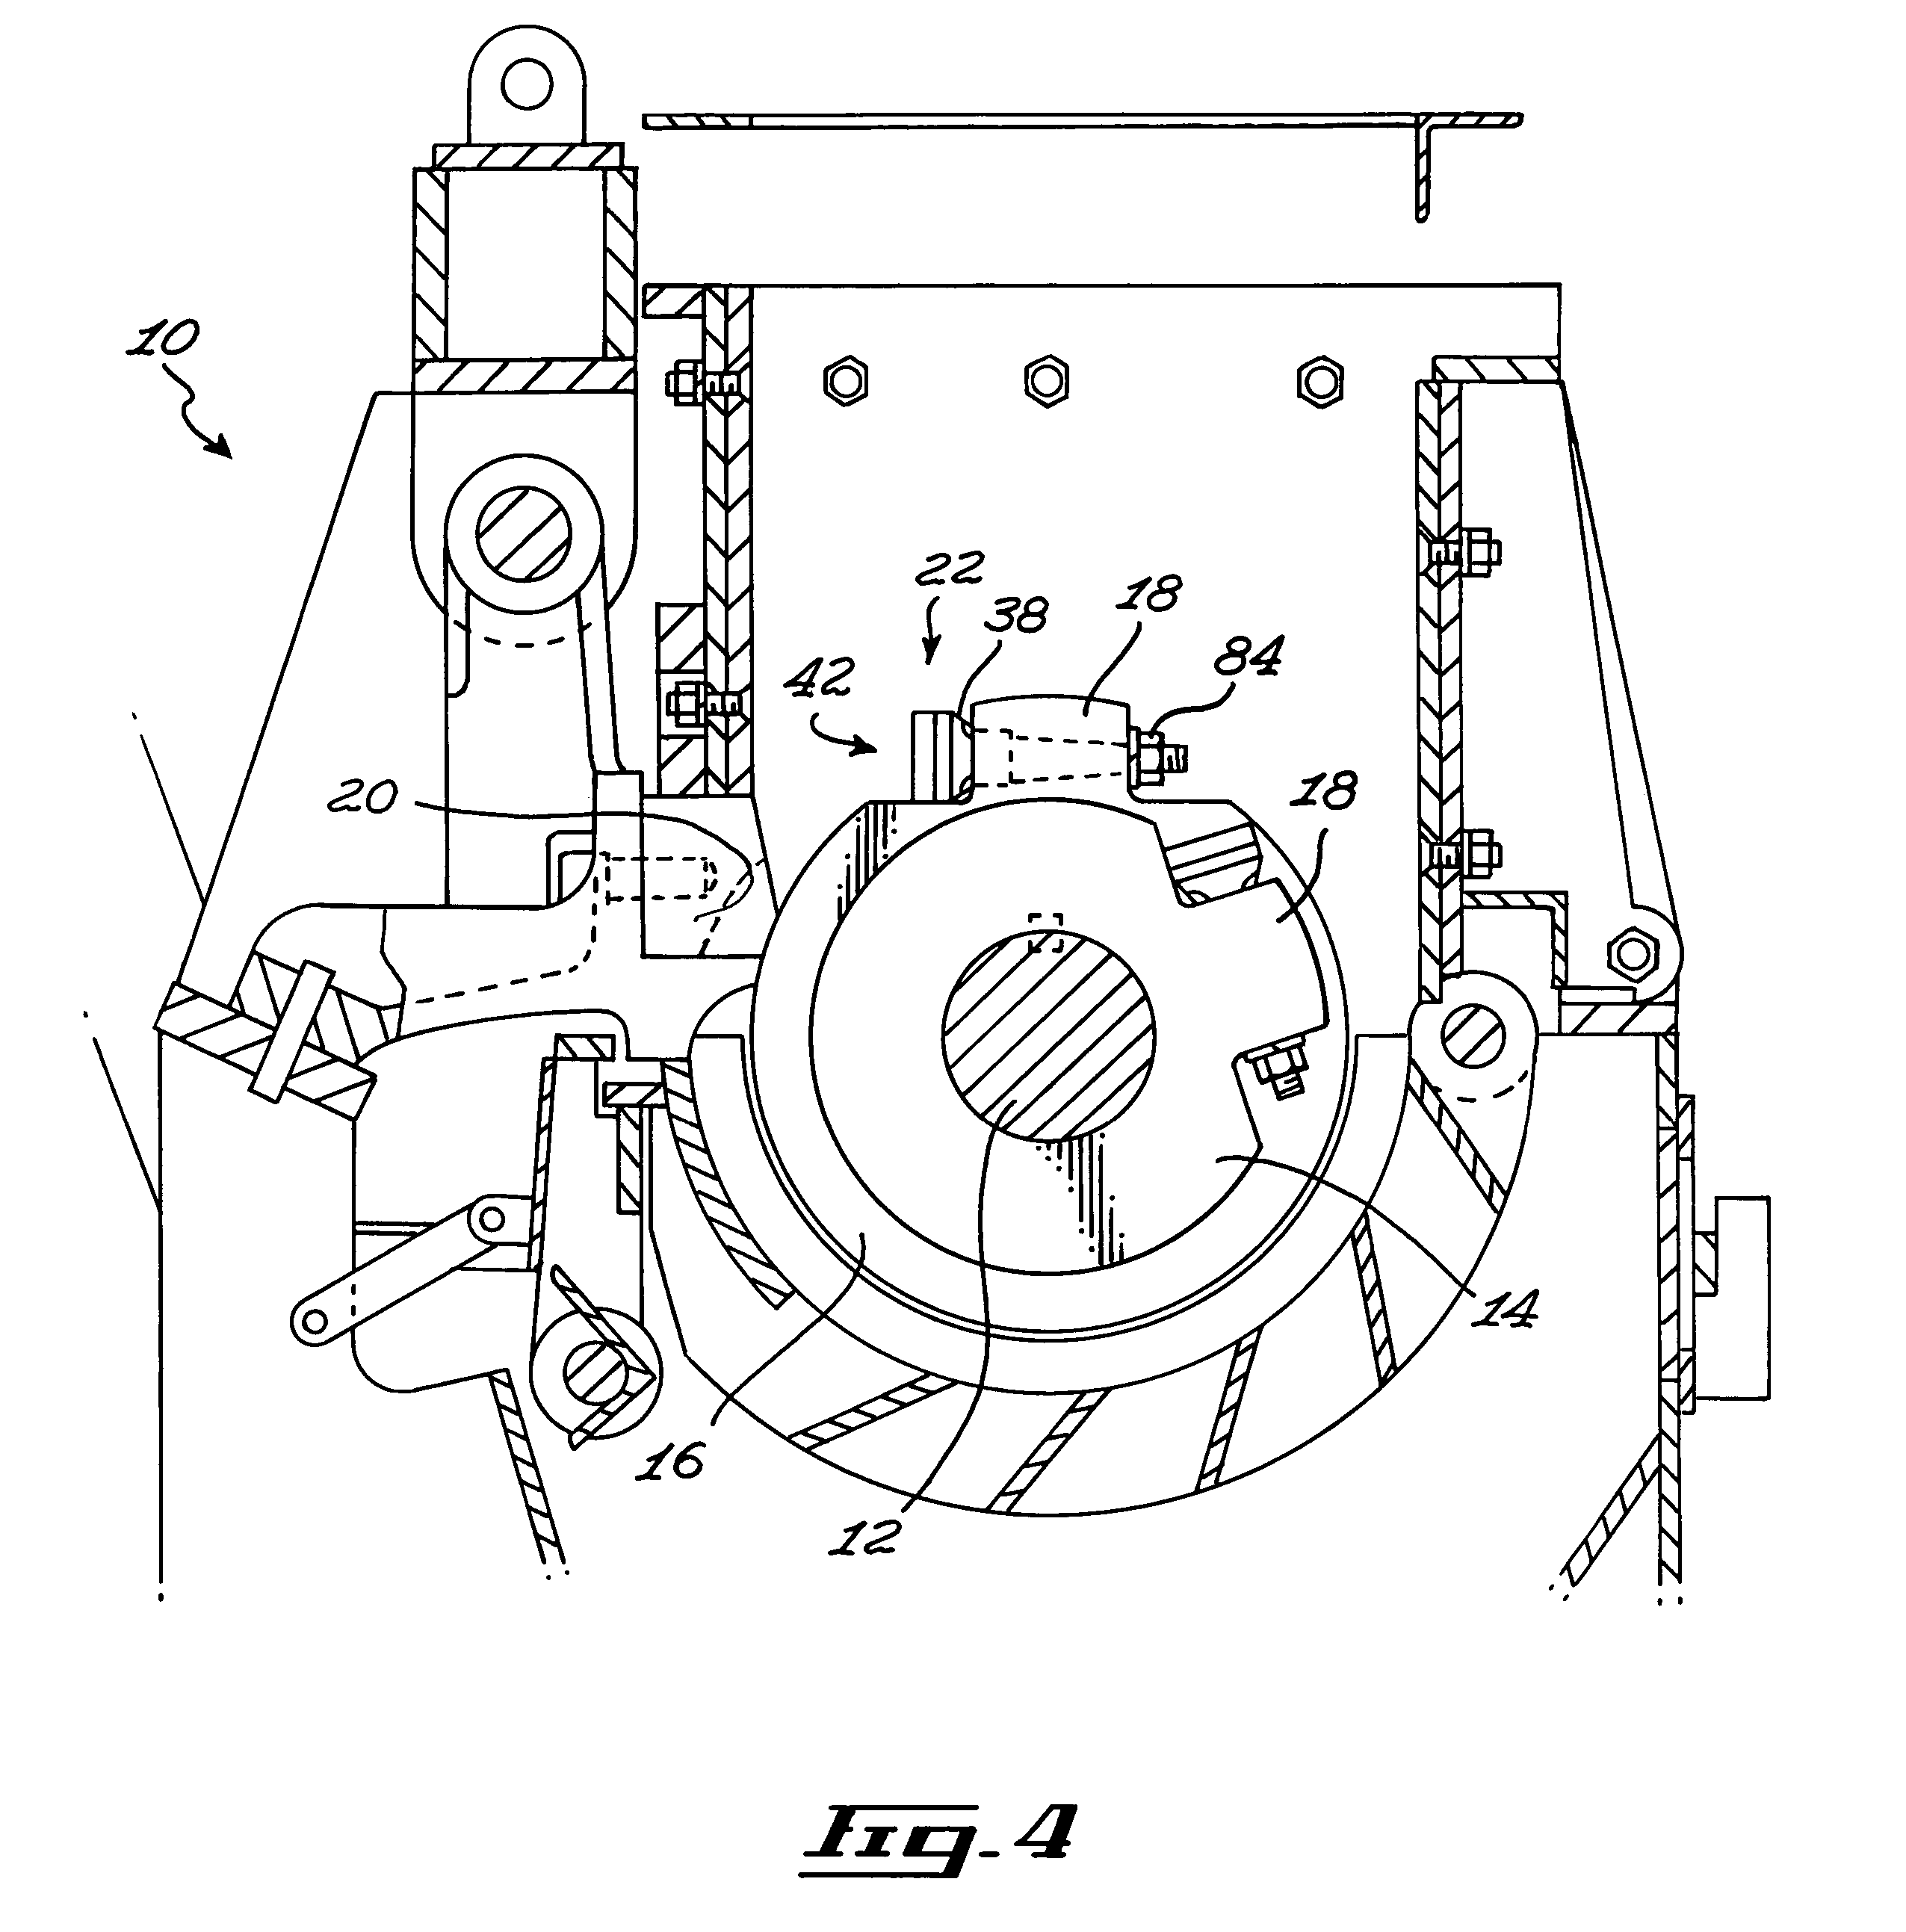 Grinder cutter tooth and anvil assembly